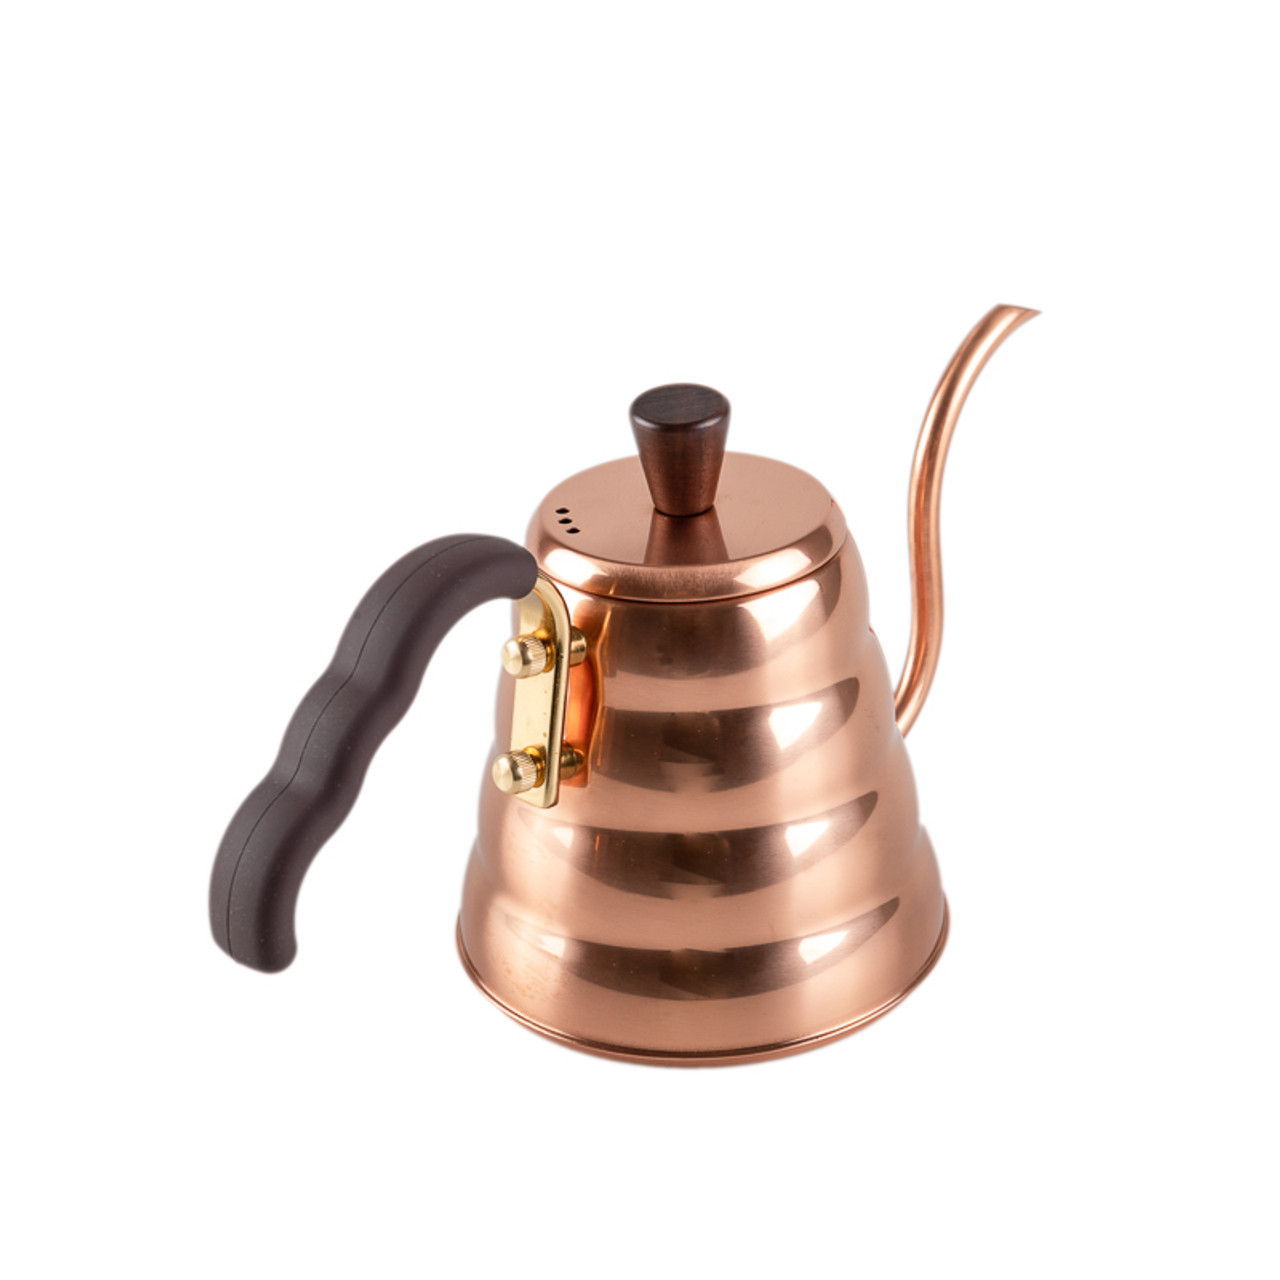 https://cdn11.bigcommerce.com/s-6h7ychjk4/images/stencil/1280x1280/products/10050/91566/hario-buono-kettle-copper-3__73100.1611605456.jpg?c=1&imbypass=on